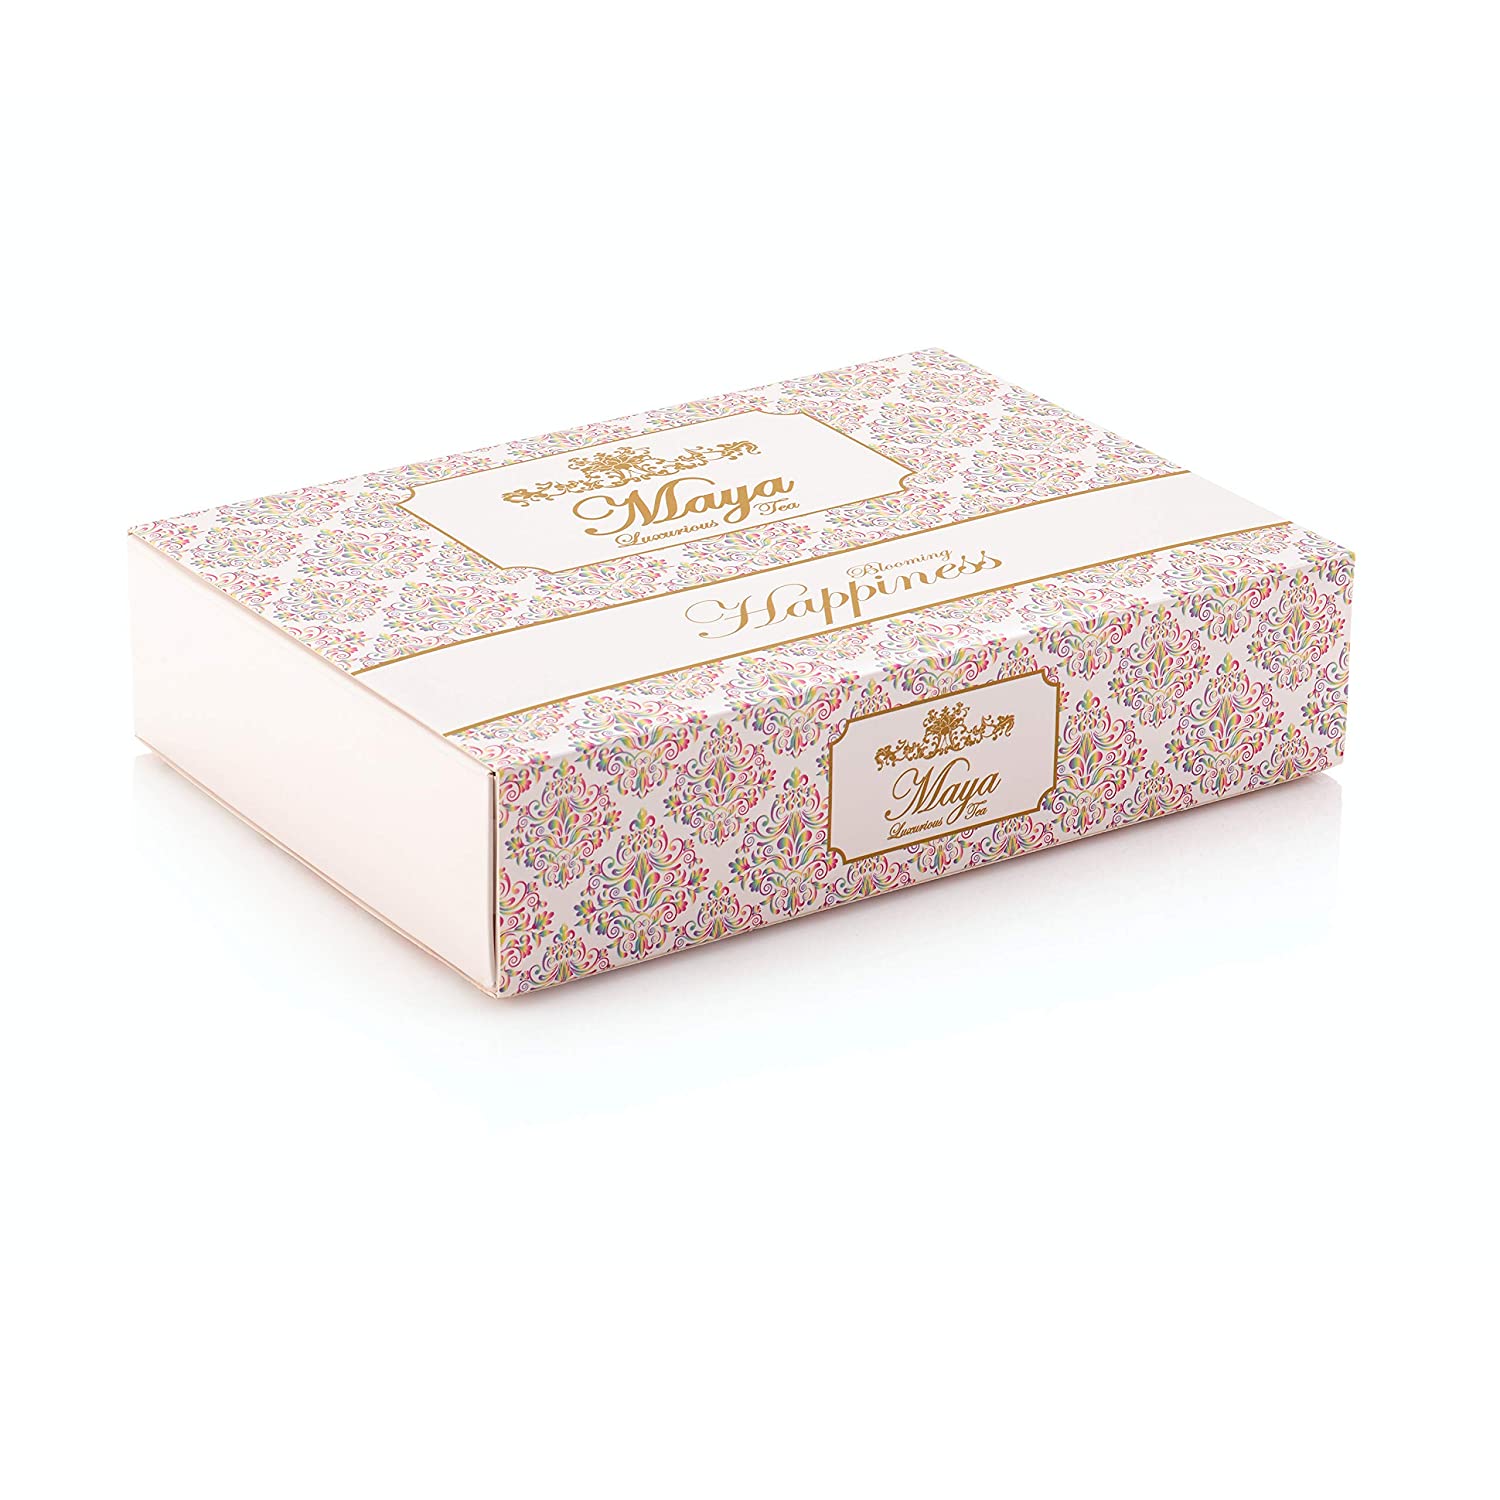 Blooming Happiness, Pack of 12 by Maya Luxurious